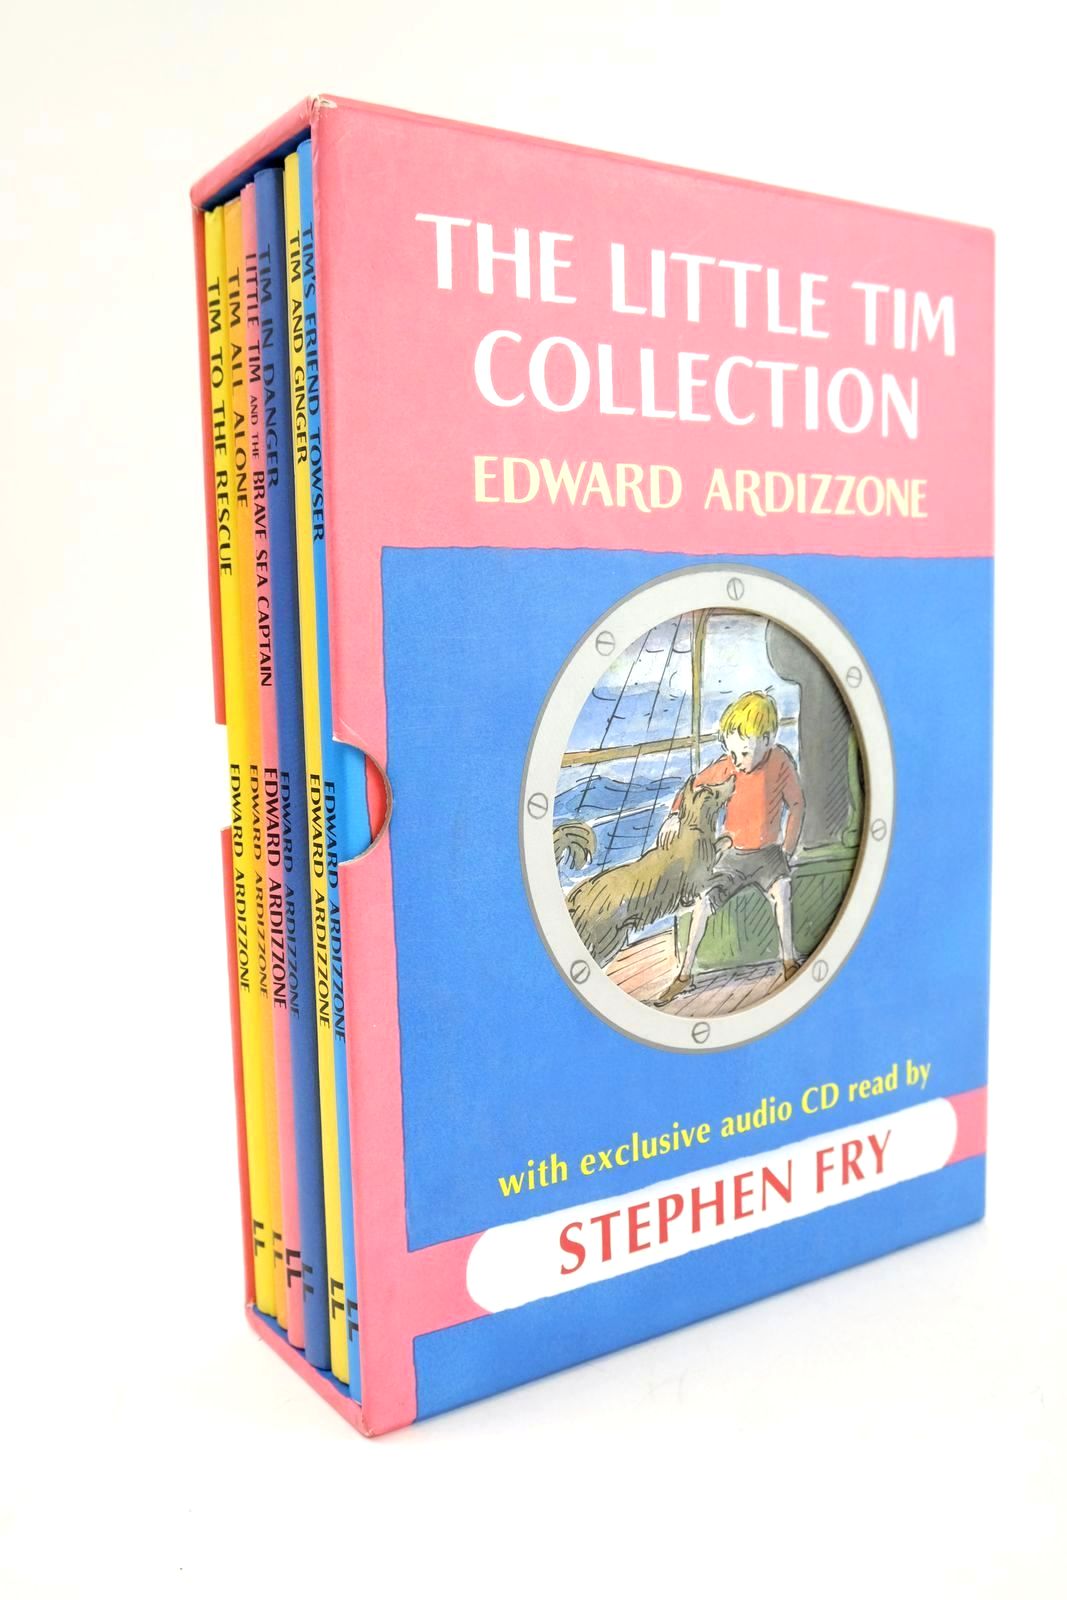 Photo of THE LITTLE TIM COLLECTION WITH EXCLUSIVE AUDIO CD READ BY STEPHEN FRY written by Ardizzone, Edward illustrated by Ardizzone, Edward published by Frances Lincoln Children's Books (STOCK CODE: 1324876)  for sale by Stella & Rose's Books